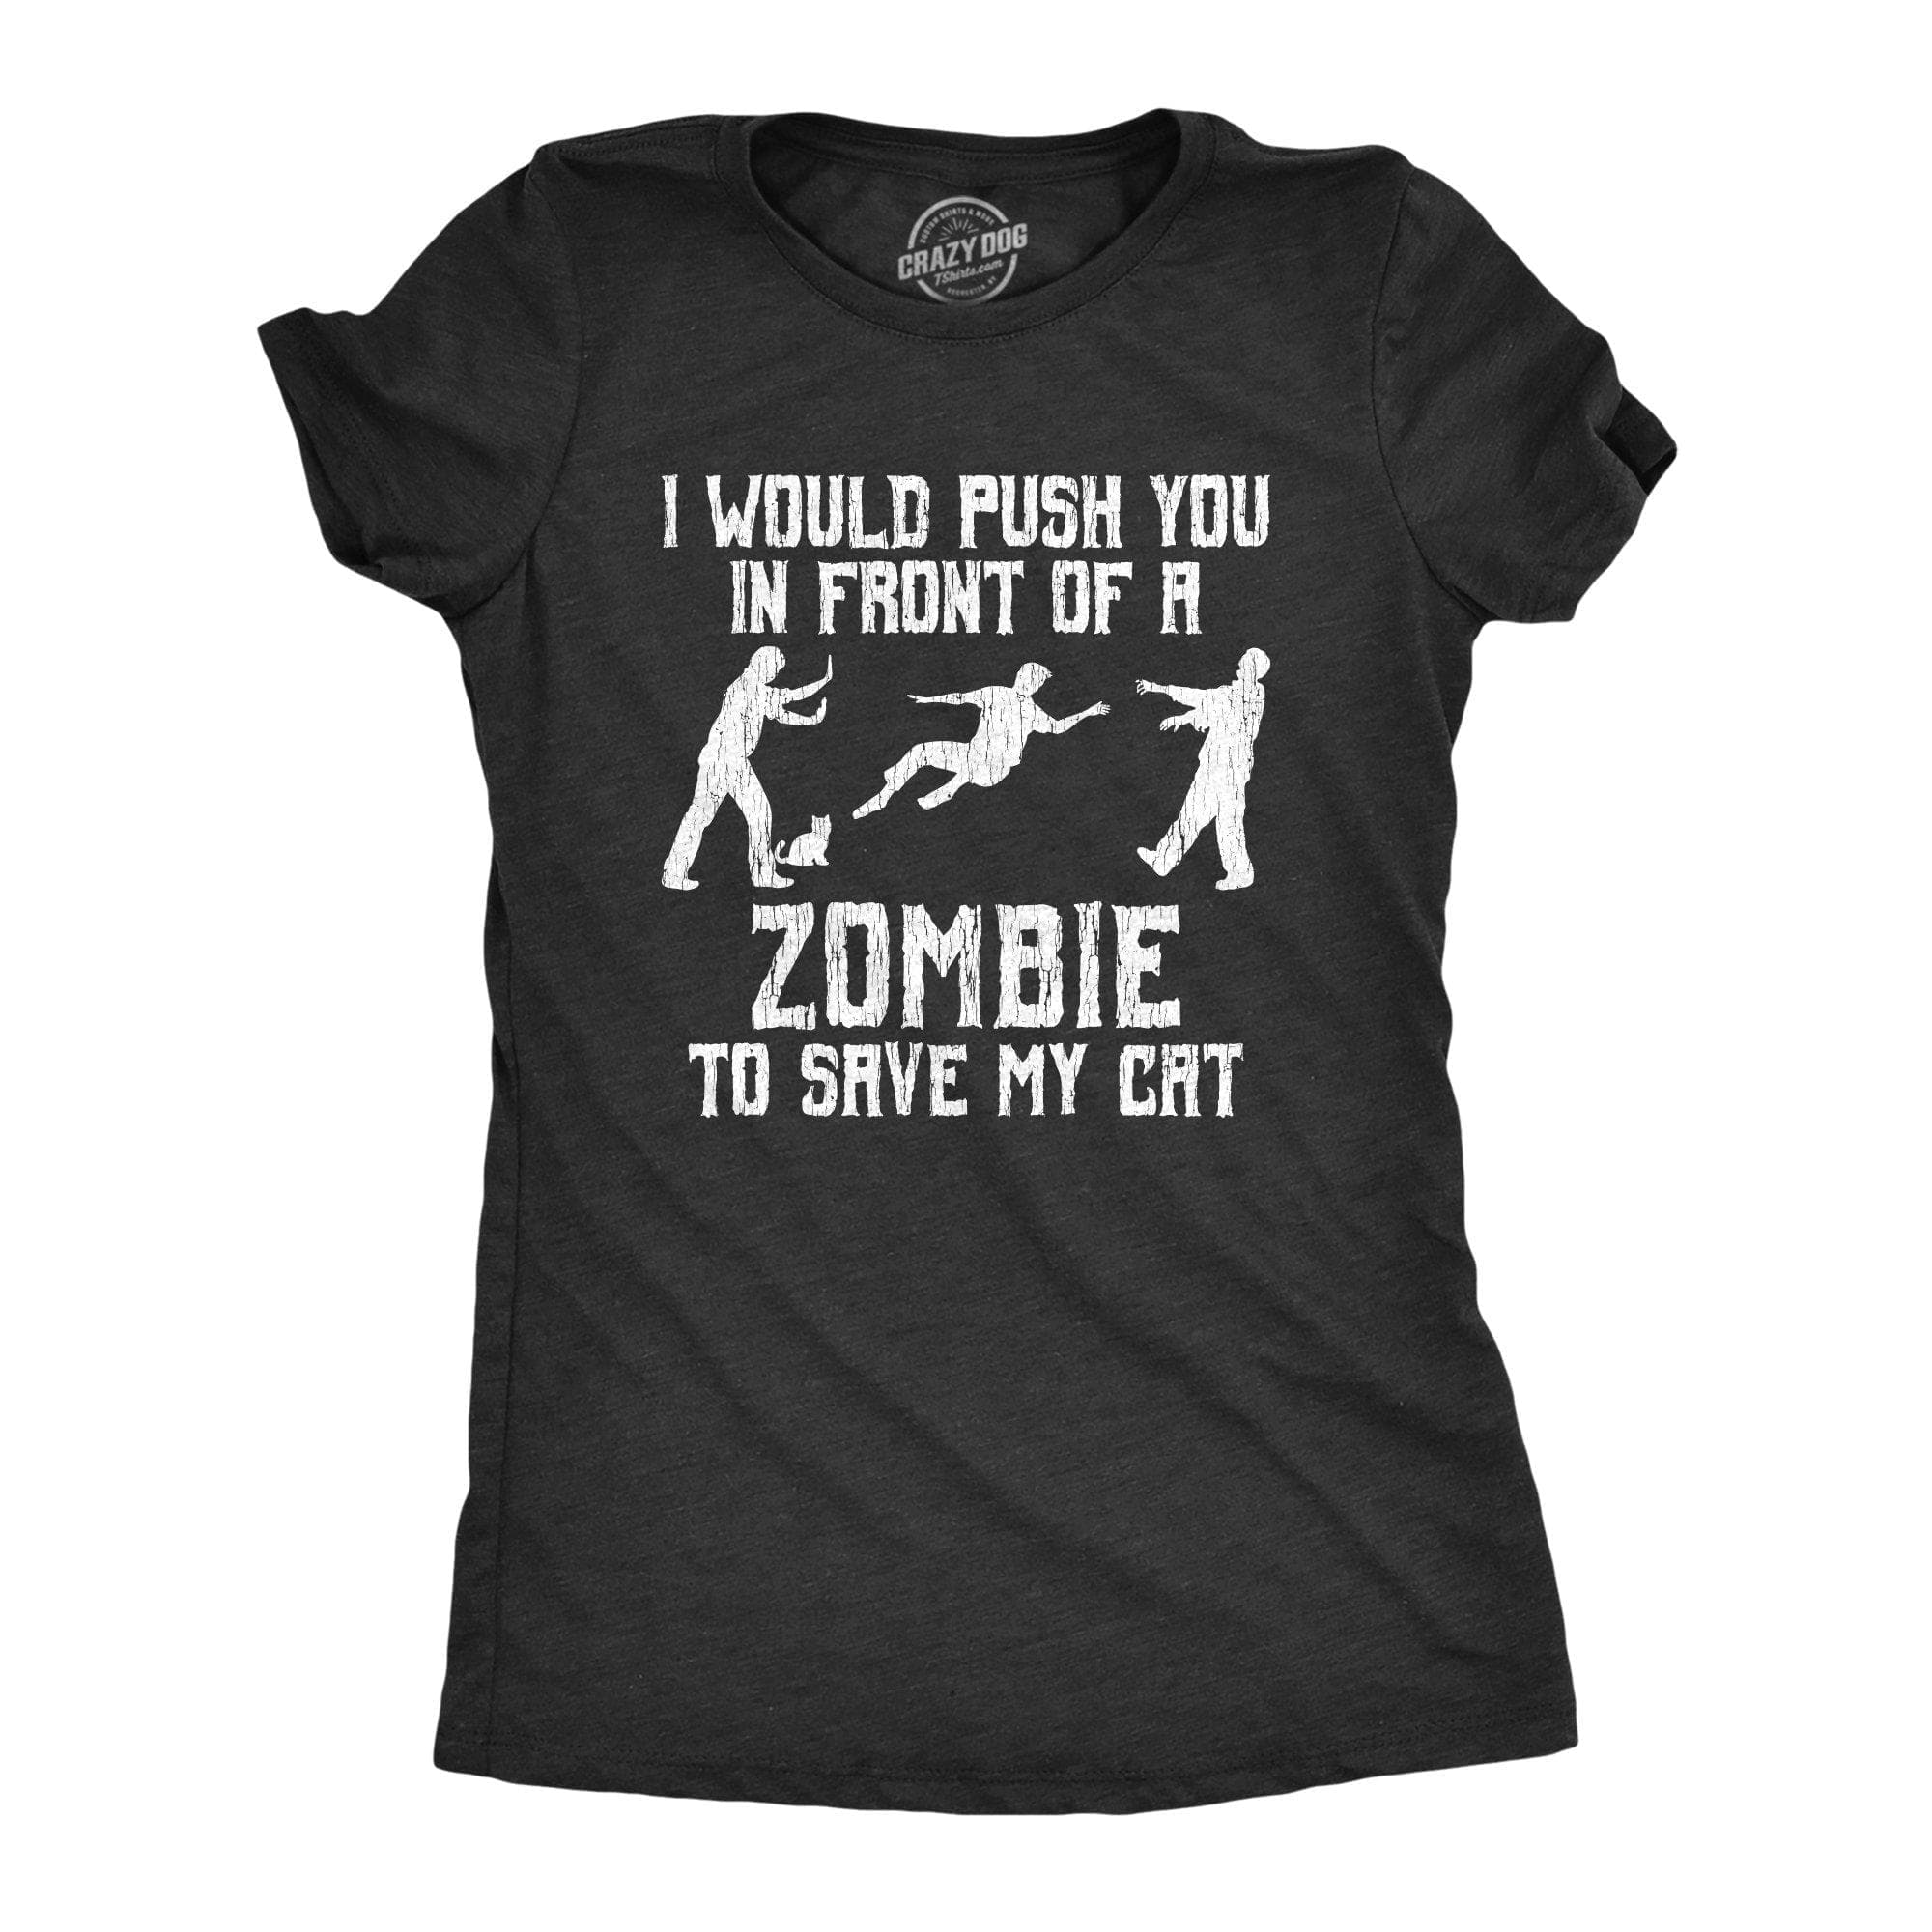 I Would Push You In Front Of A Zombie To Save My Cat Women's Tshirt - Crazy Dog T-Shirts